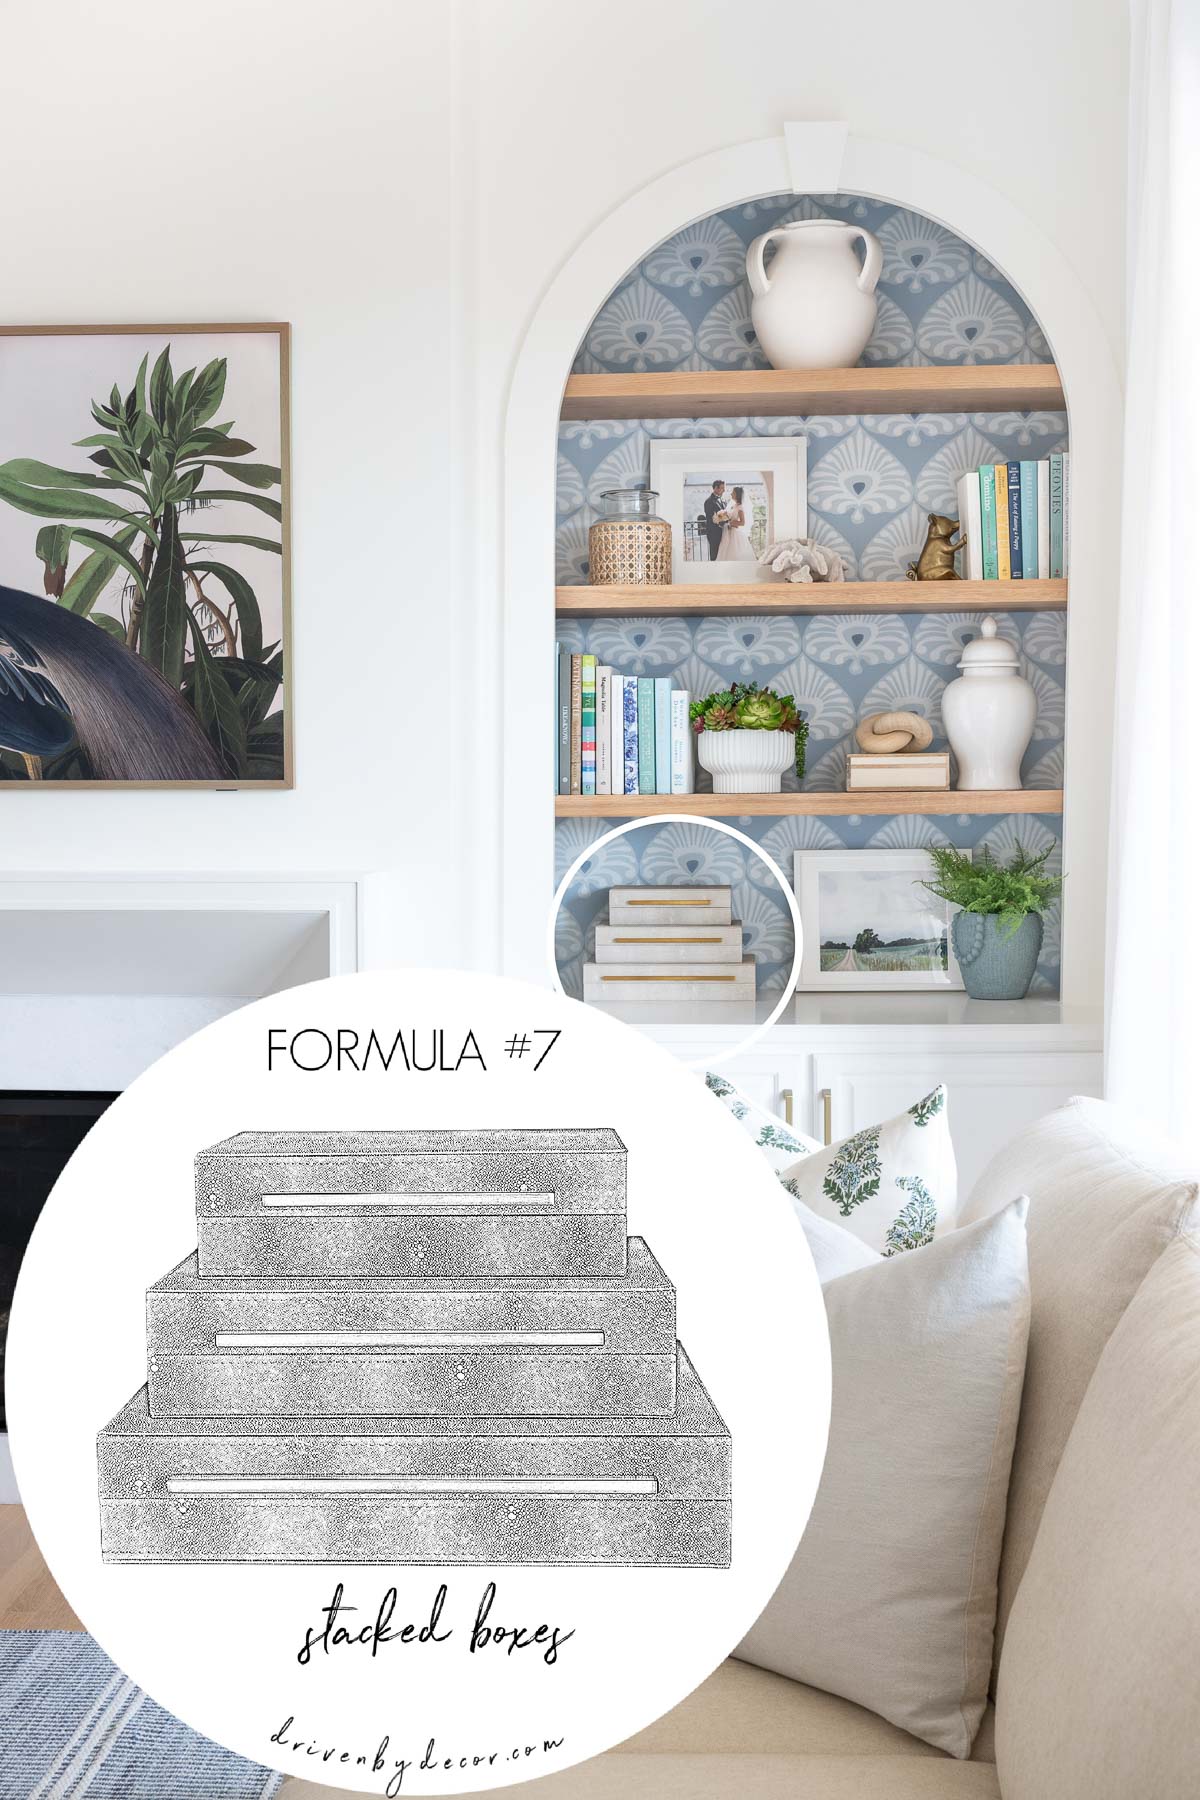 Three stacked boxes as a simple idea for how to decorate a bookshelf